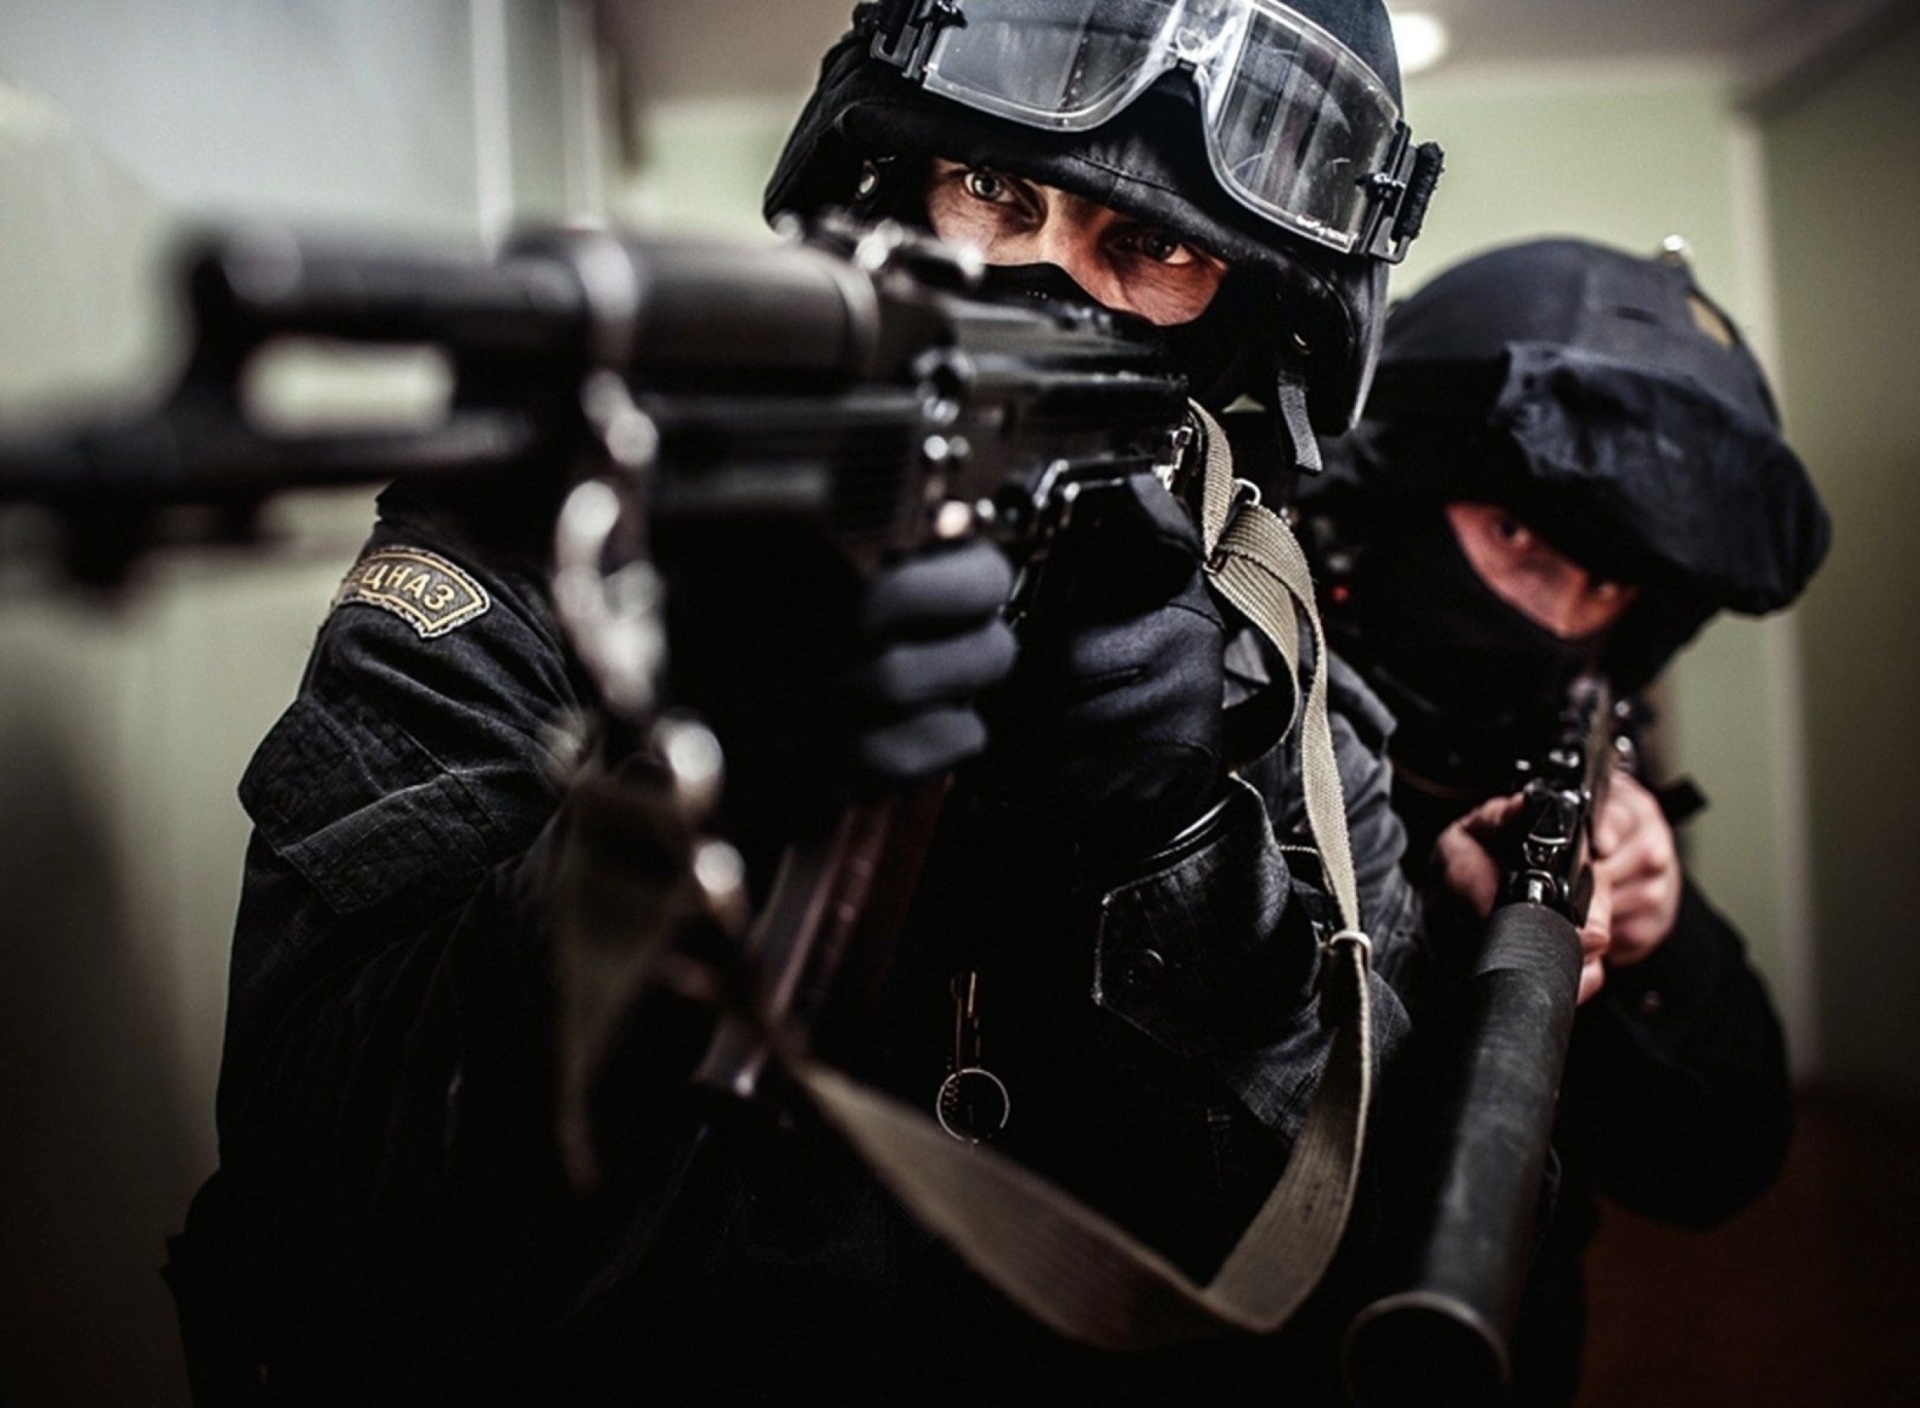 Das Police special forces Wallpaper 1920x1408